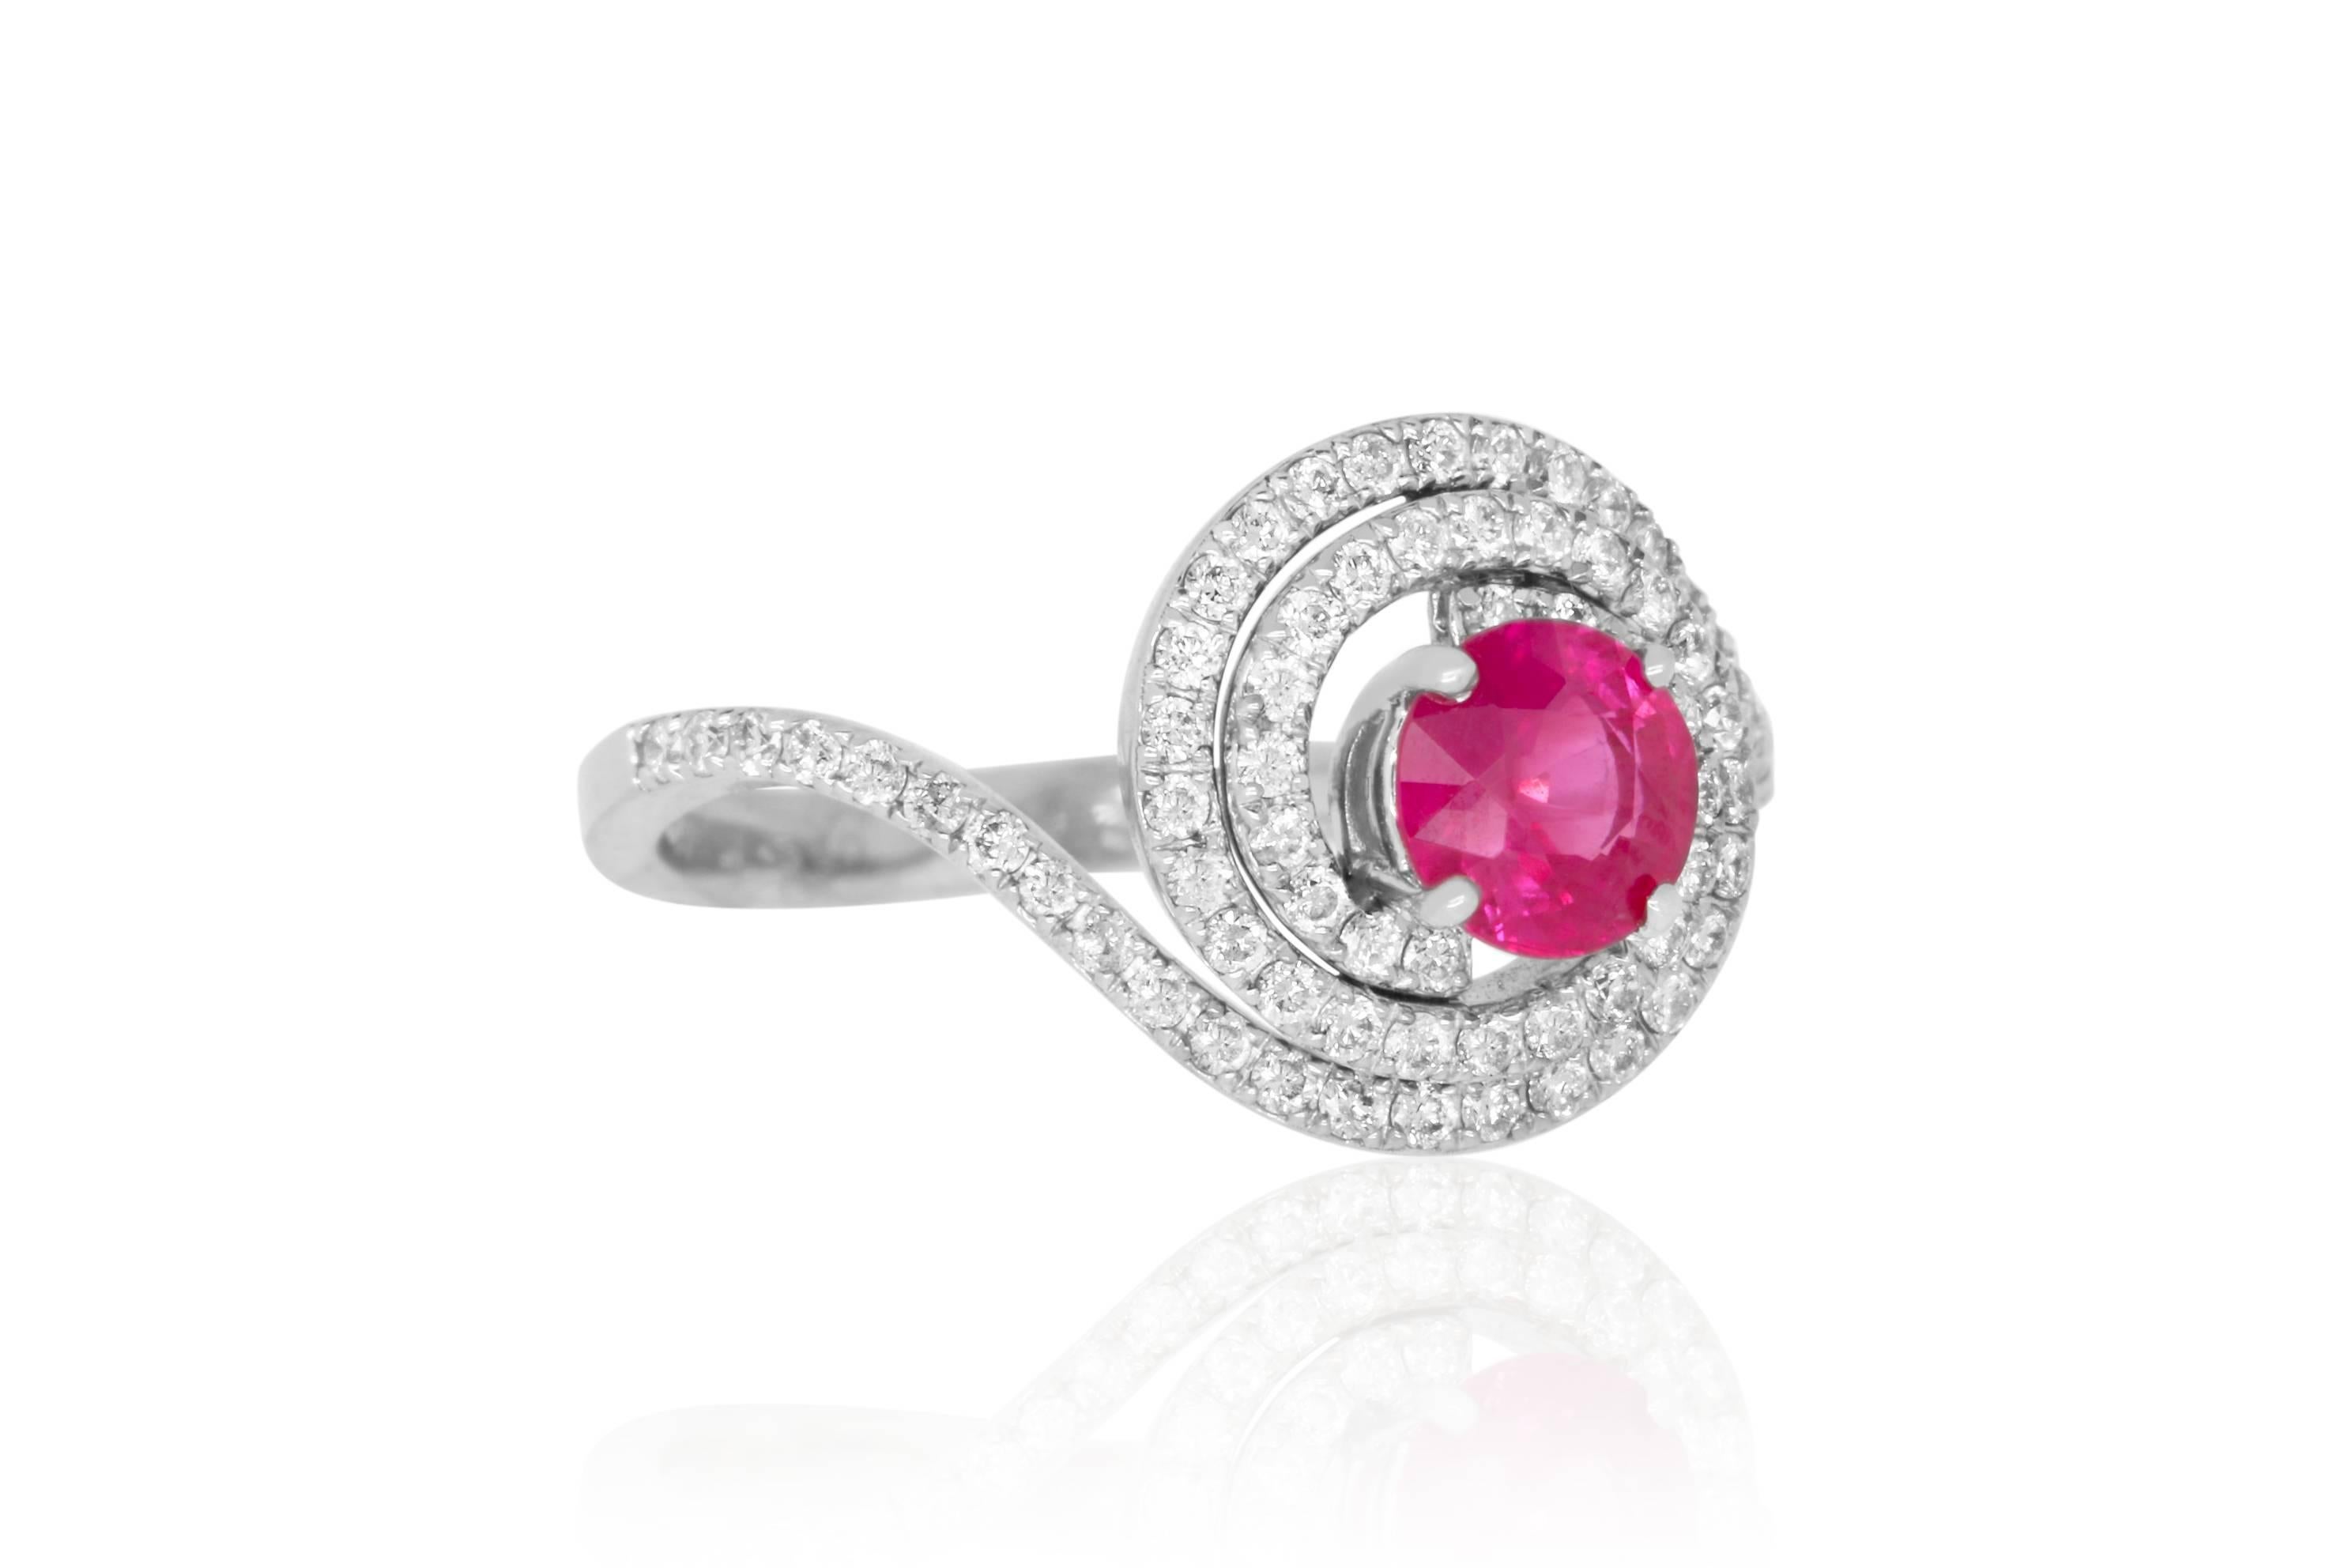 Material: 14k White Gold 
Color Stone Details:  0.98 Carat Round Cut Ruby 
Center Stone Details: 72 Round Cut White Diamonds at 0.43 Carats- Clarity: SI  / Color: H-I
Ring Size: 7. Alberto offers complimentary sizing on all rings.

Fine one-of-a